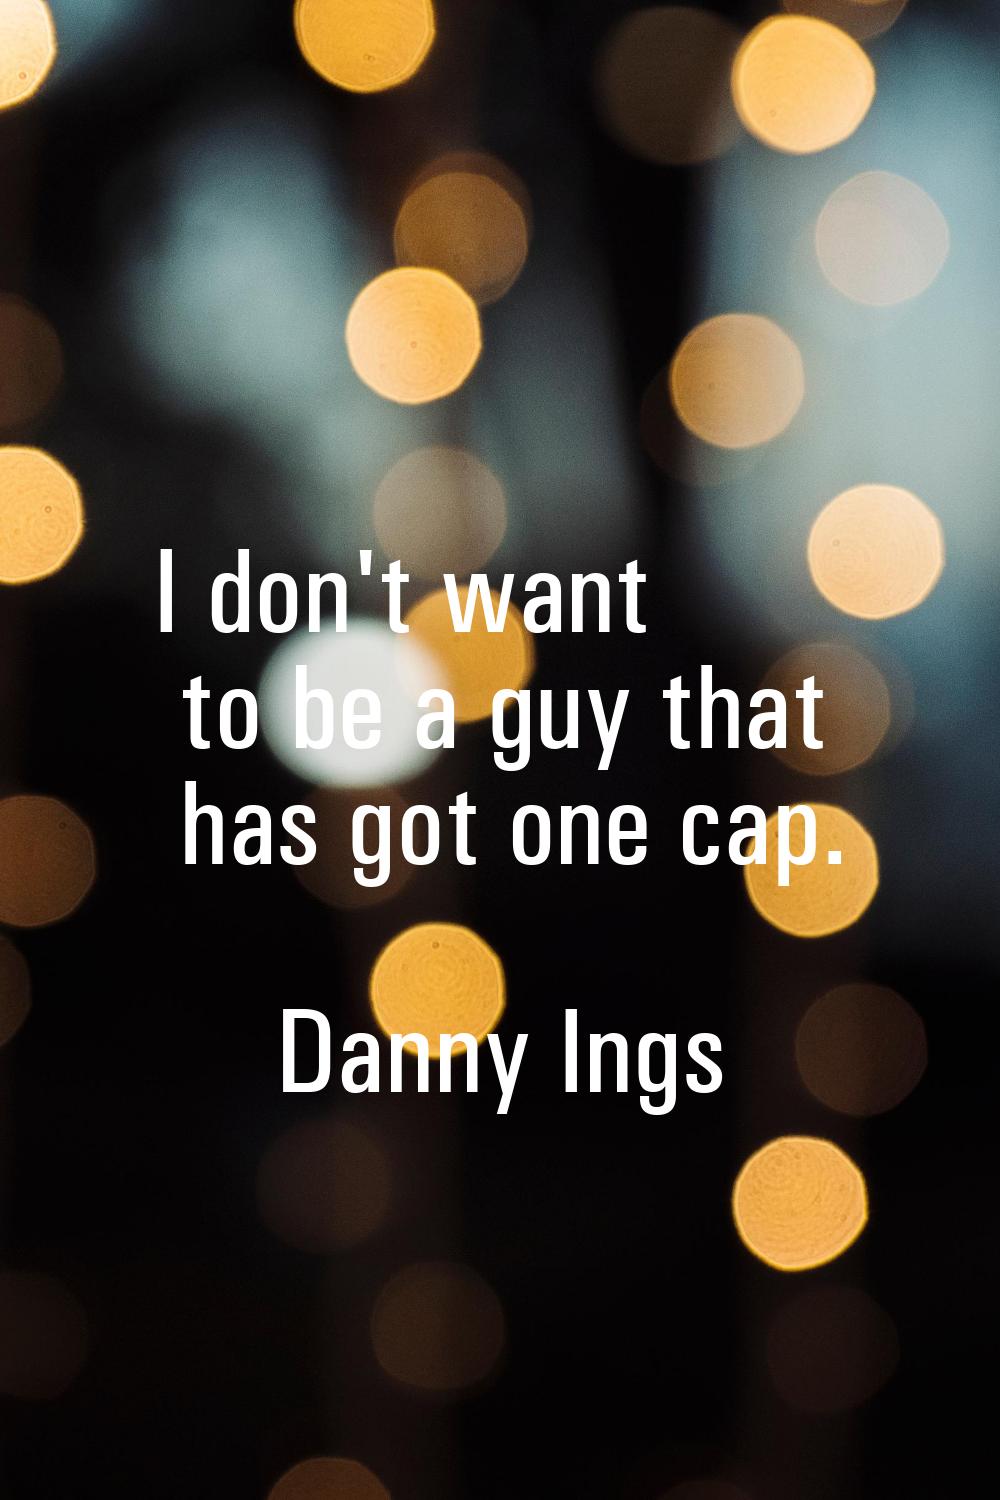 I don't want to be a guy that has got one cap.